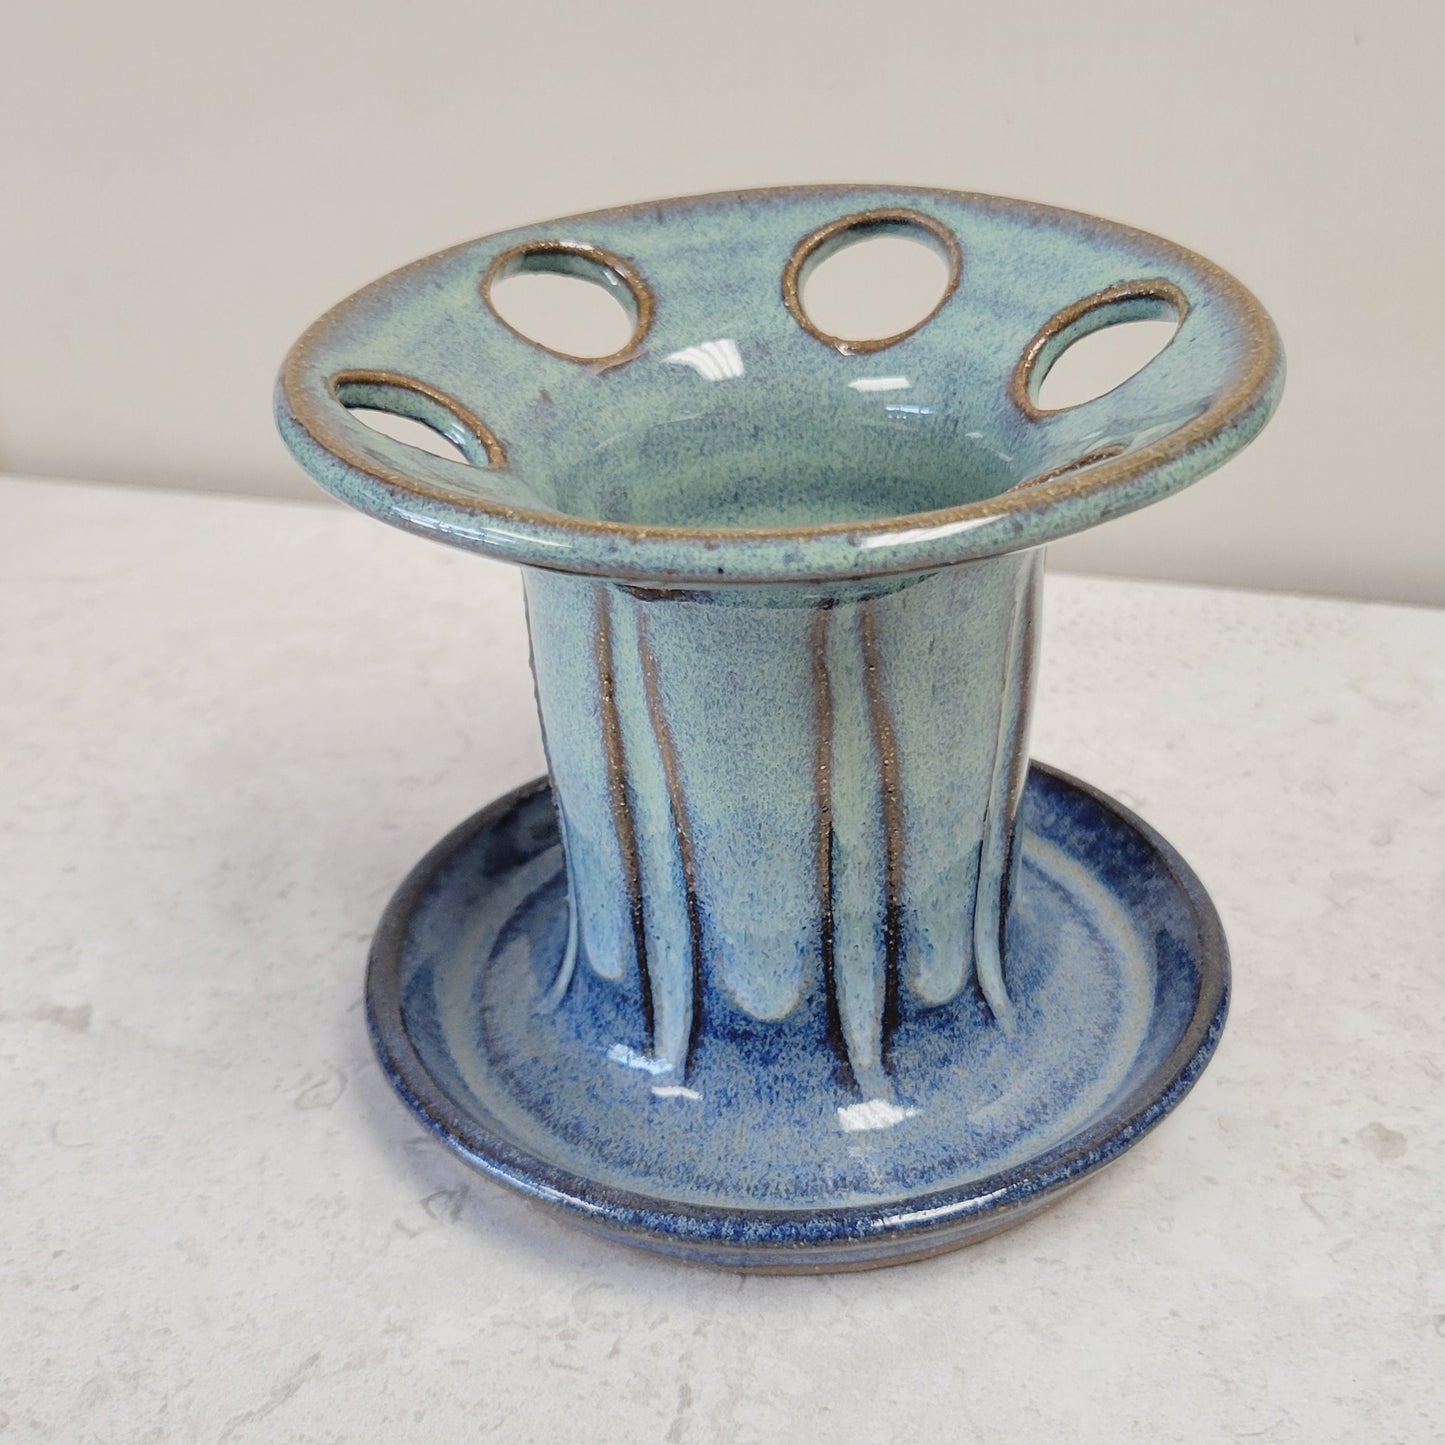 Toothbrush Holder 6 Slots in Cobalt Blue and Green Glaze